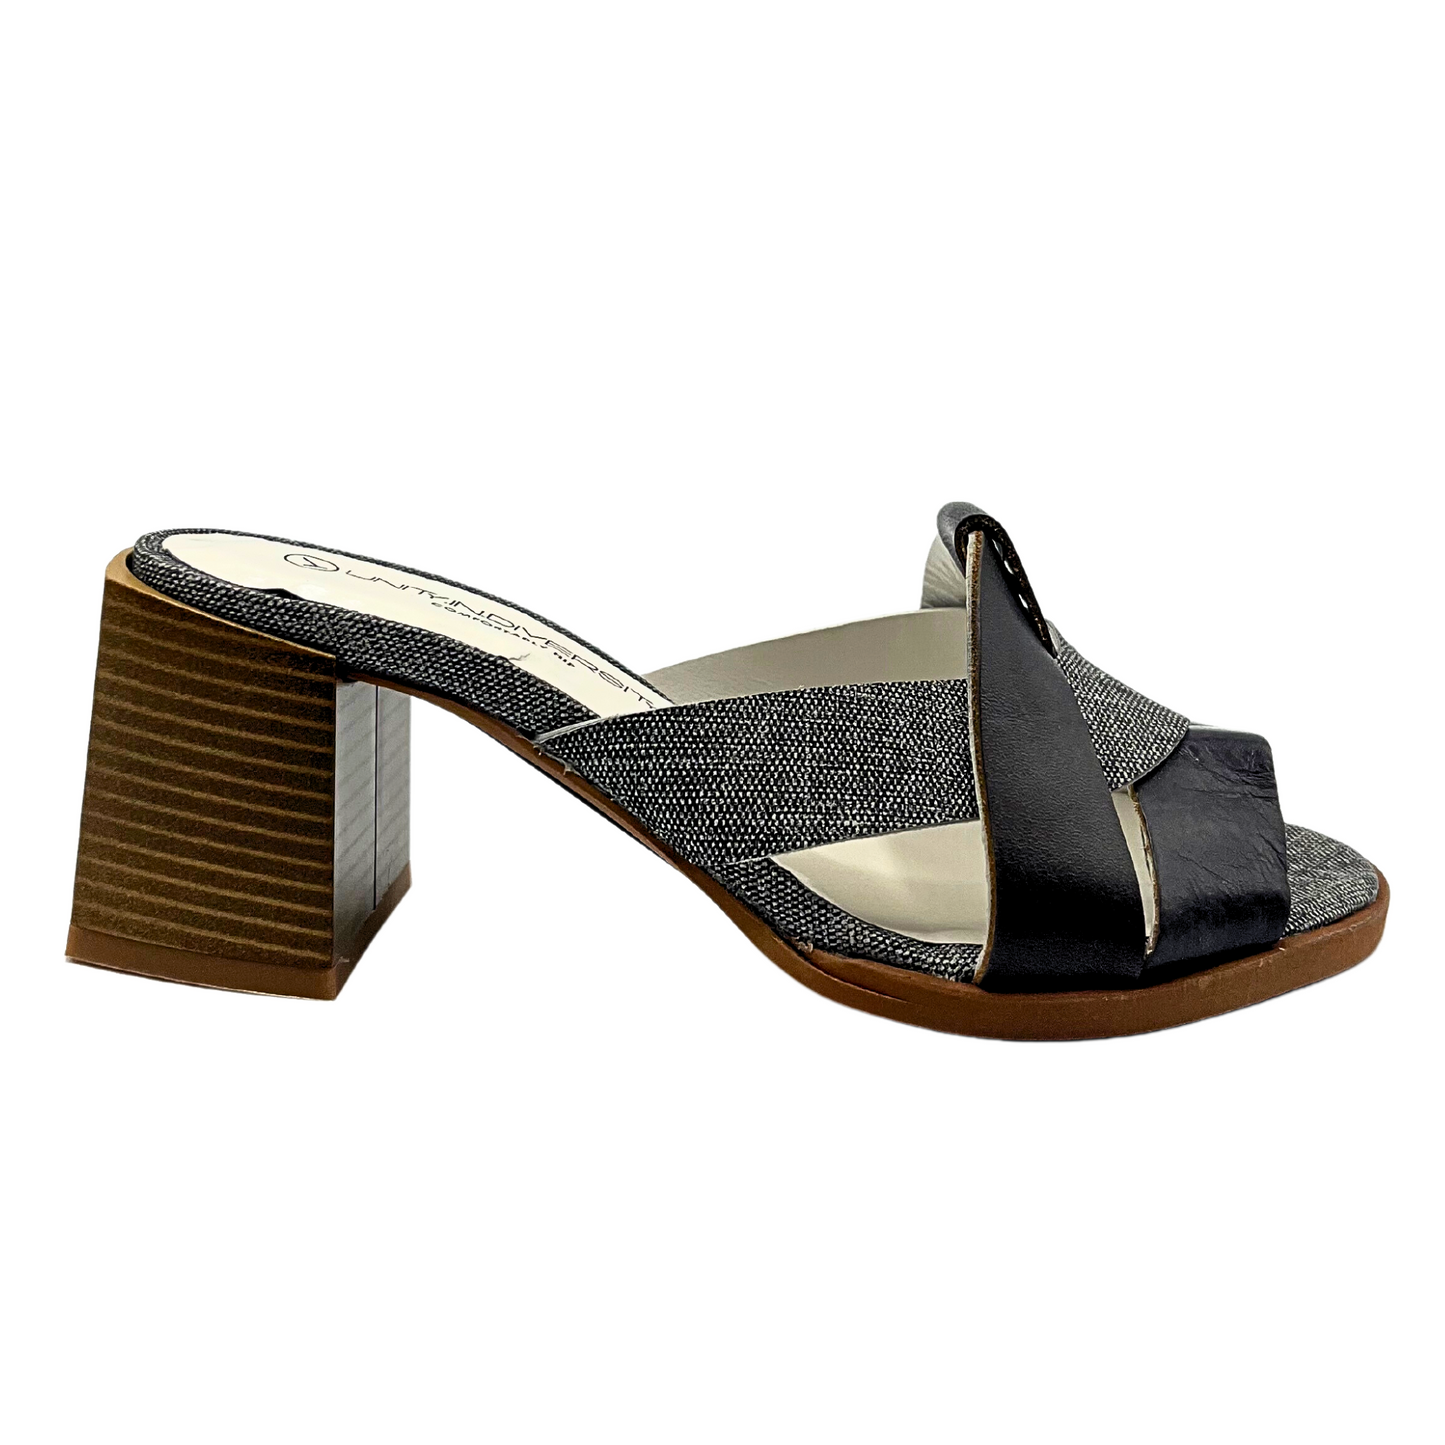 Outside view of the Soryal mule.  Black/grey upper is contrasted with a wood outsole and heel